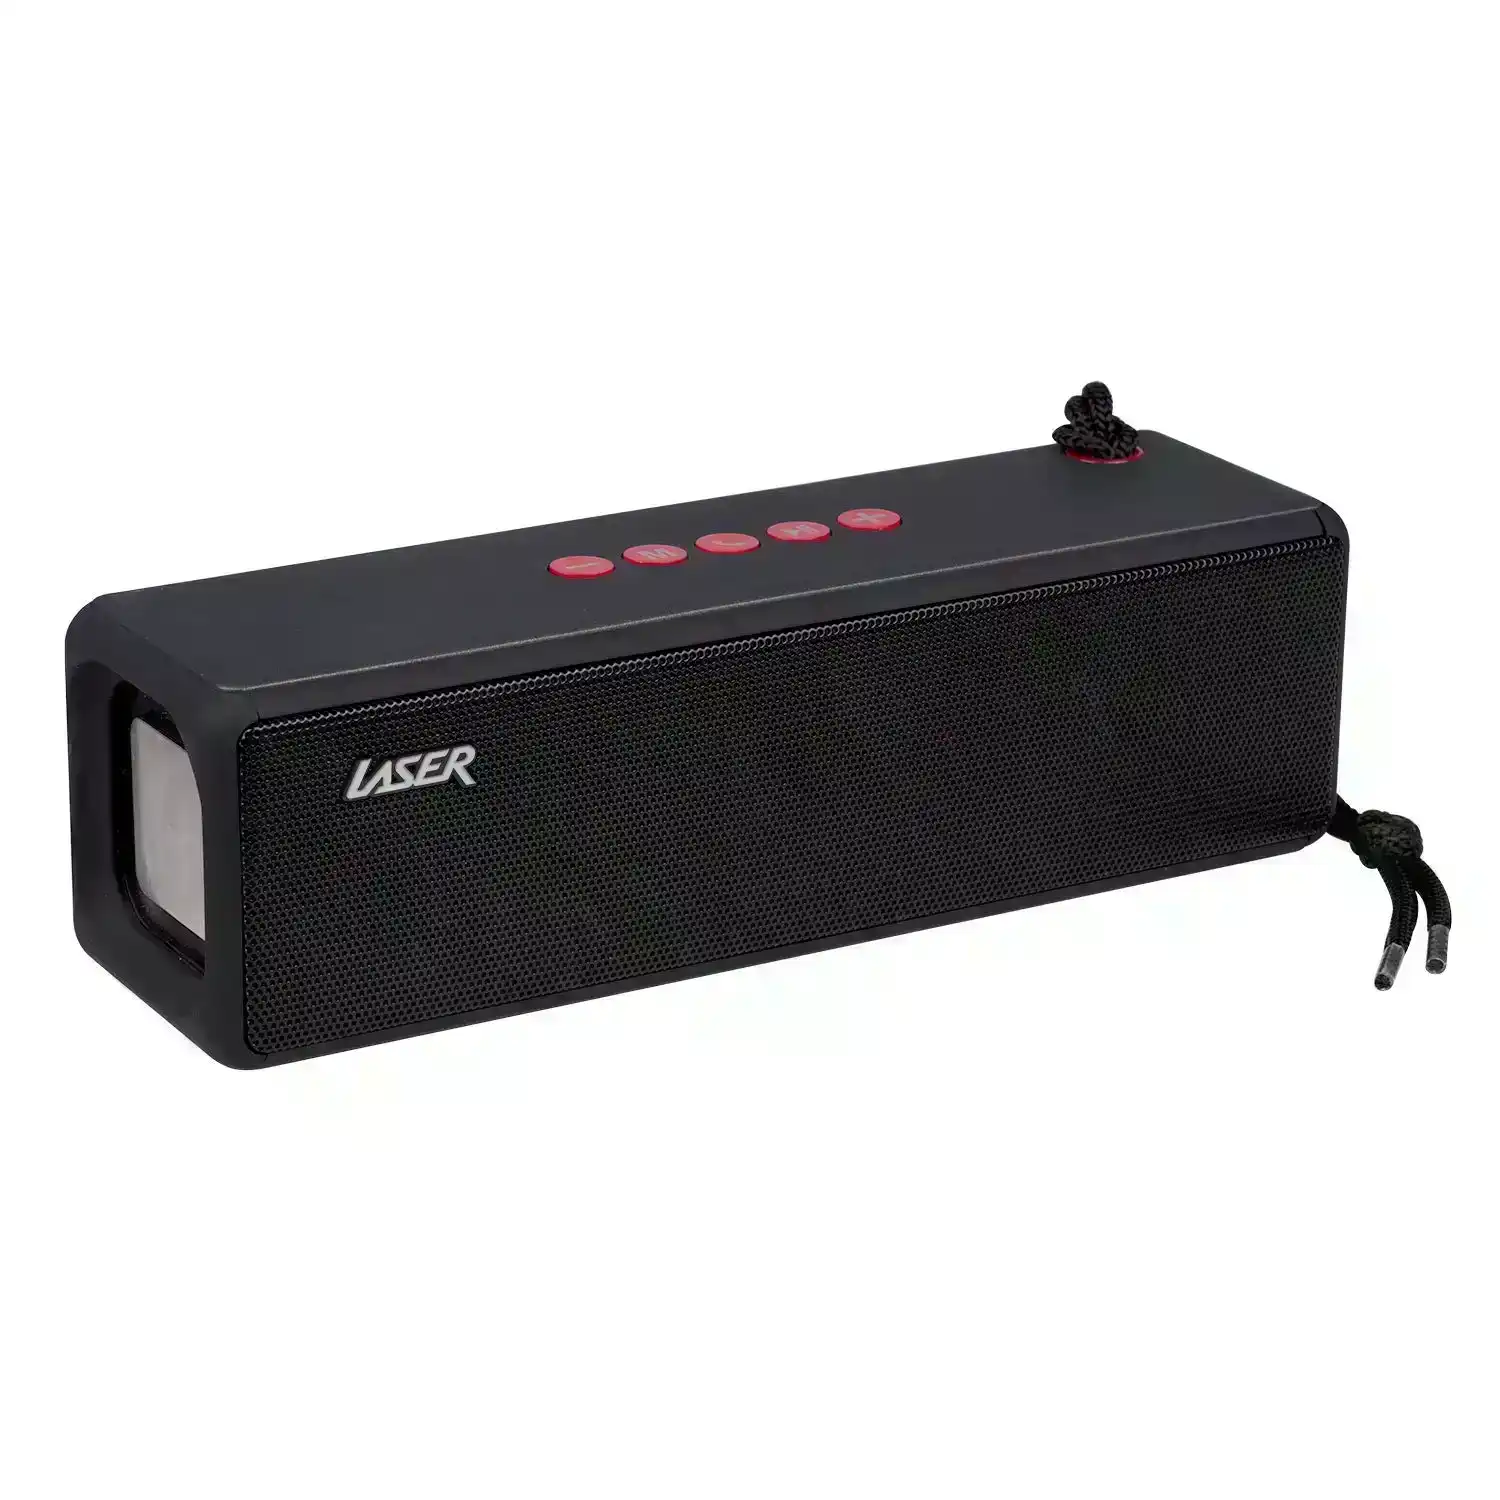 Laser Bluetooth TWS Bar Speaker - Stereo Sound, Mic, Rechargeable Battery